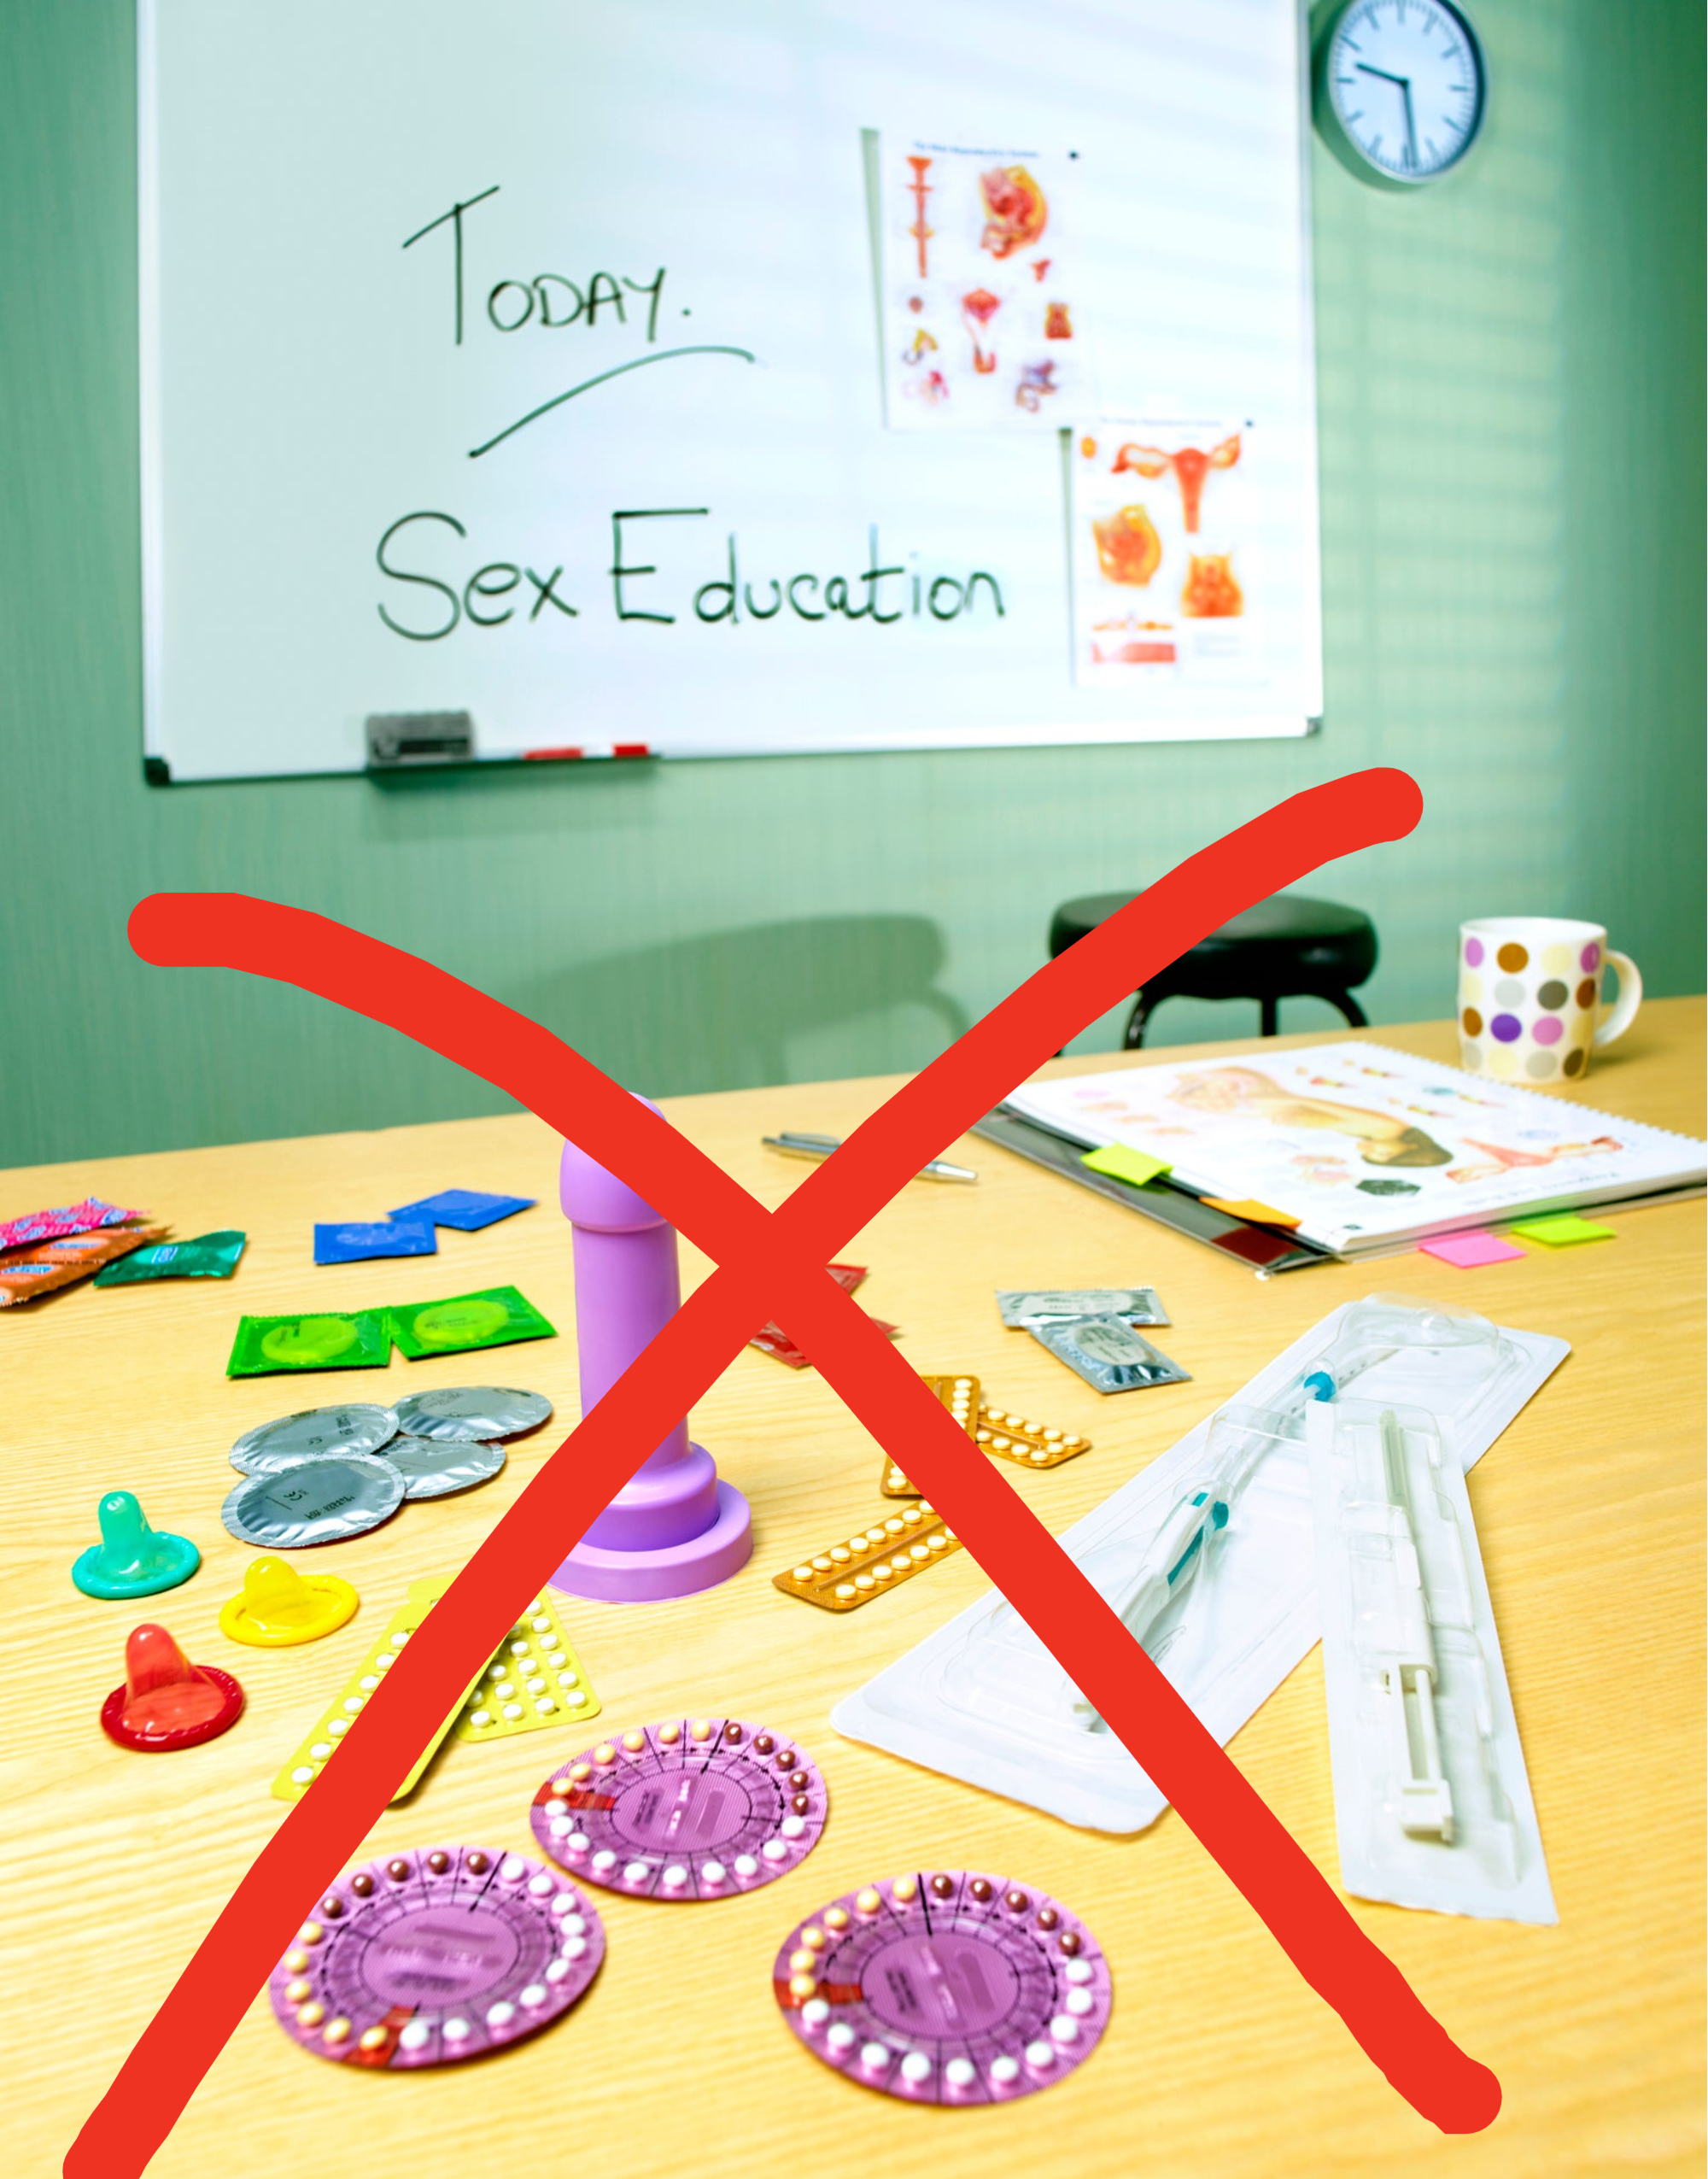 A classroom setting with sex education materials, including contraceptives and diagrams, on a desk